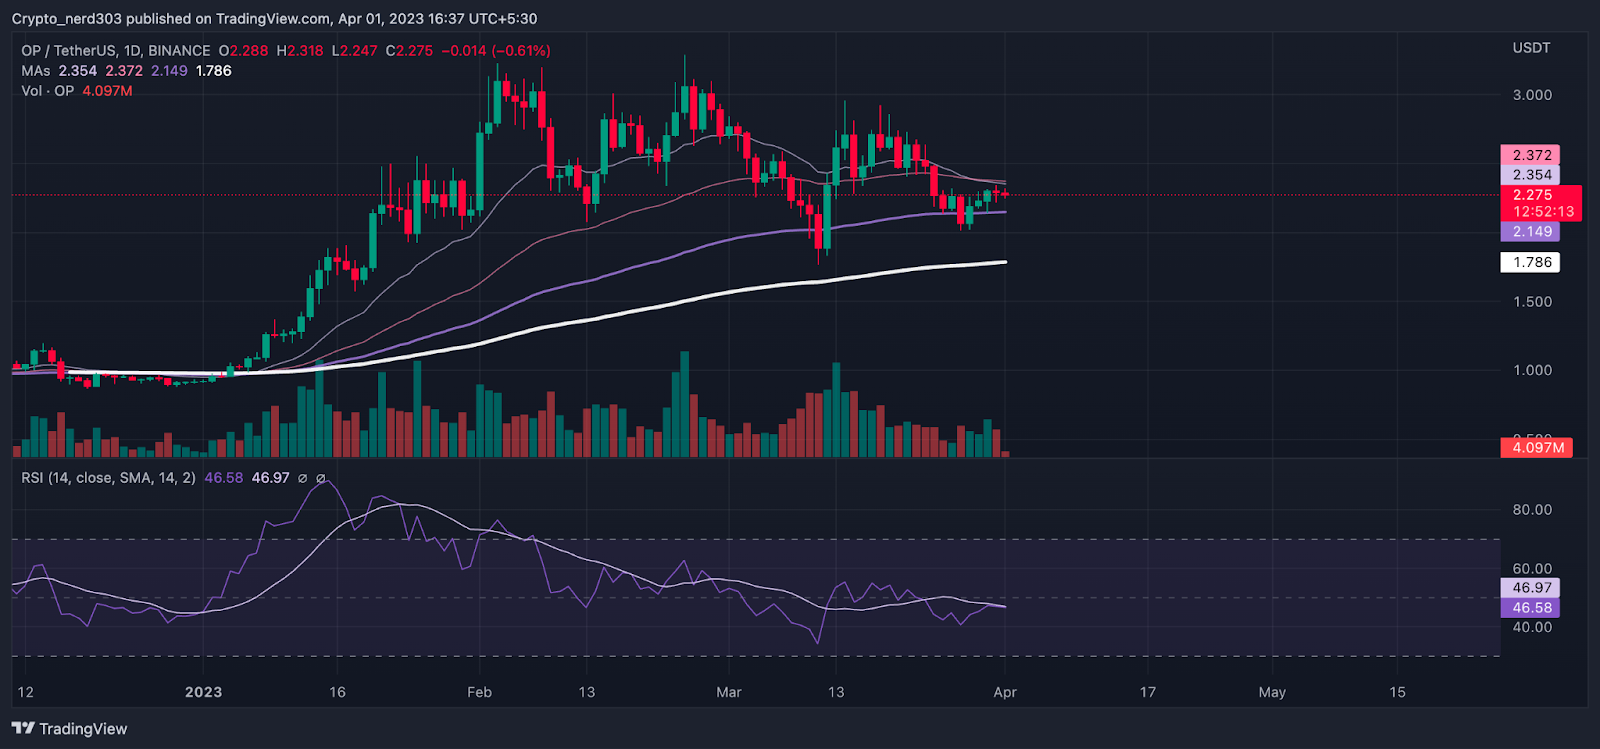 Op Price Analysis: Op Price May Take A Downward Correction - Crypto Insight